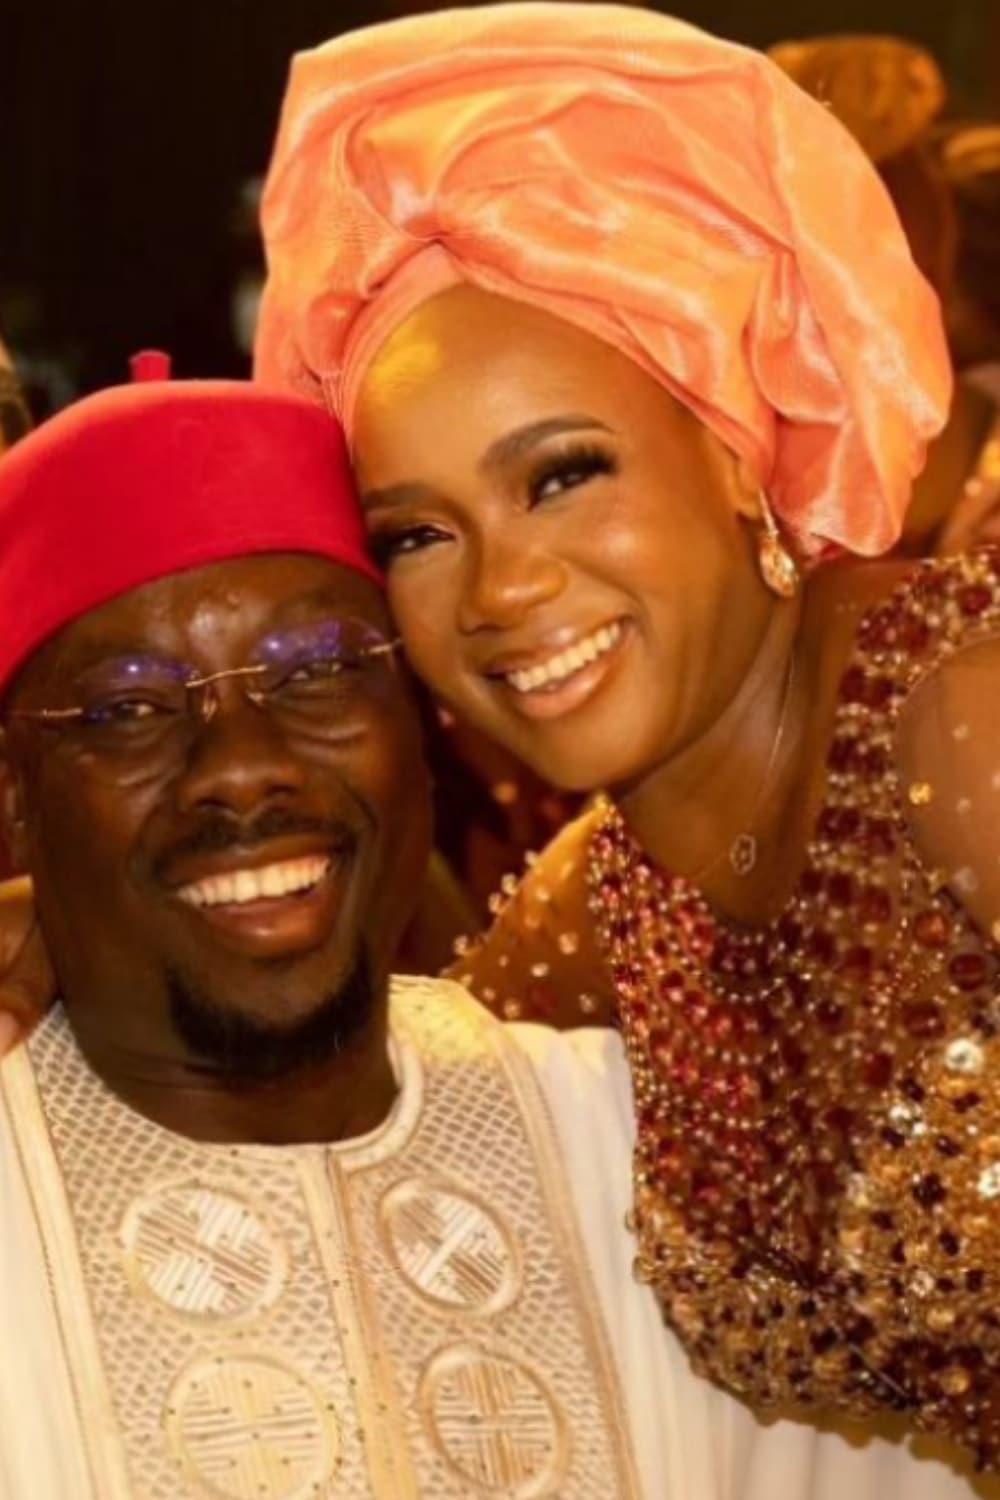 "When you go complete your wife's dowry?" - Man teases obi cubana as he celebrates 15th traditional wedding anniversary with his wife